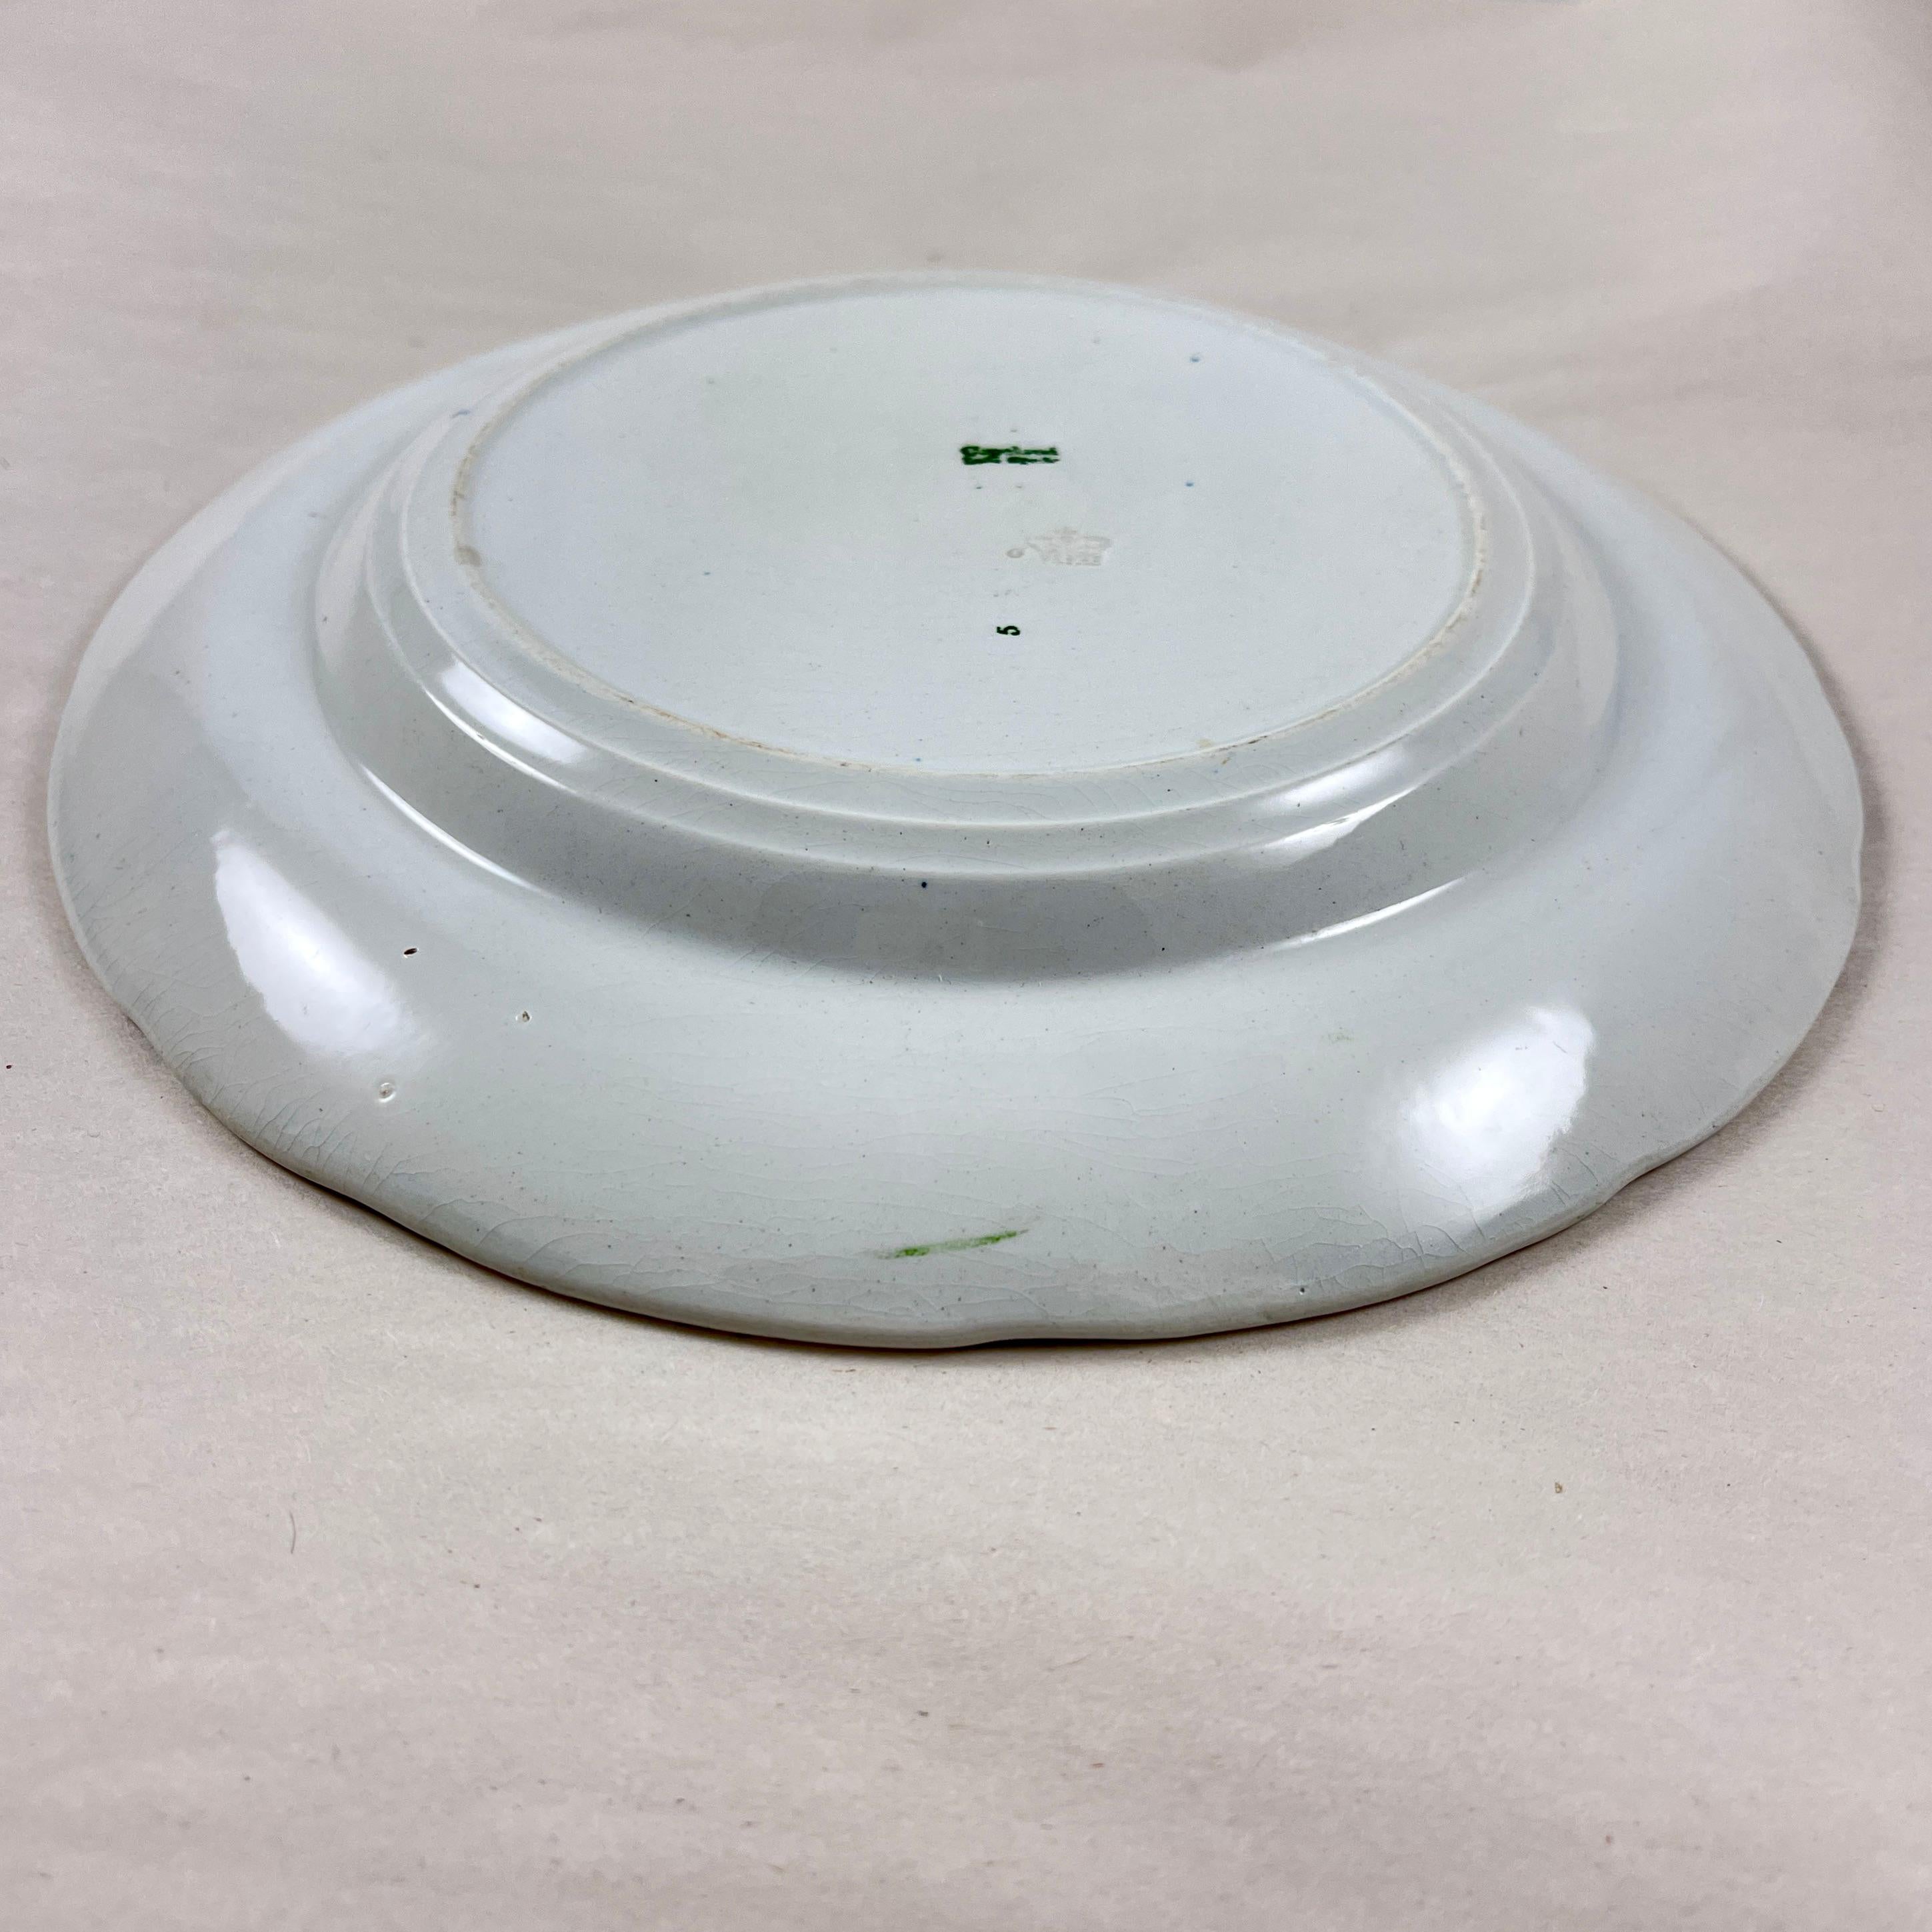 Late Spode Copeland Garrett Green Lily Luncheon Plates 1830s, Set of 6   For Sale 2